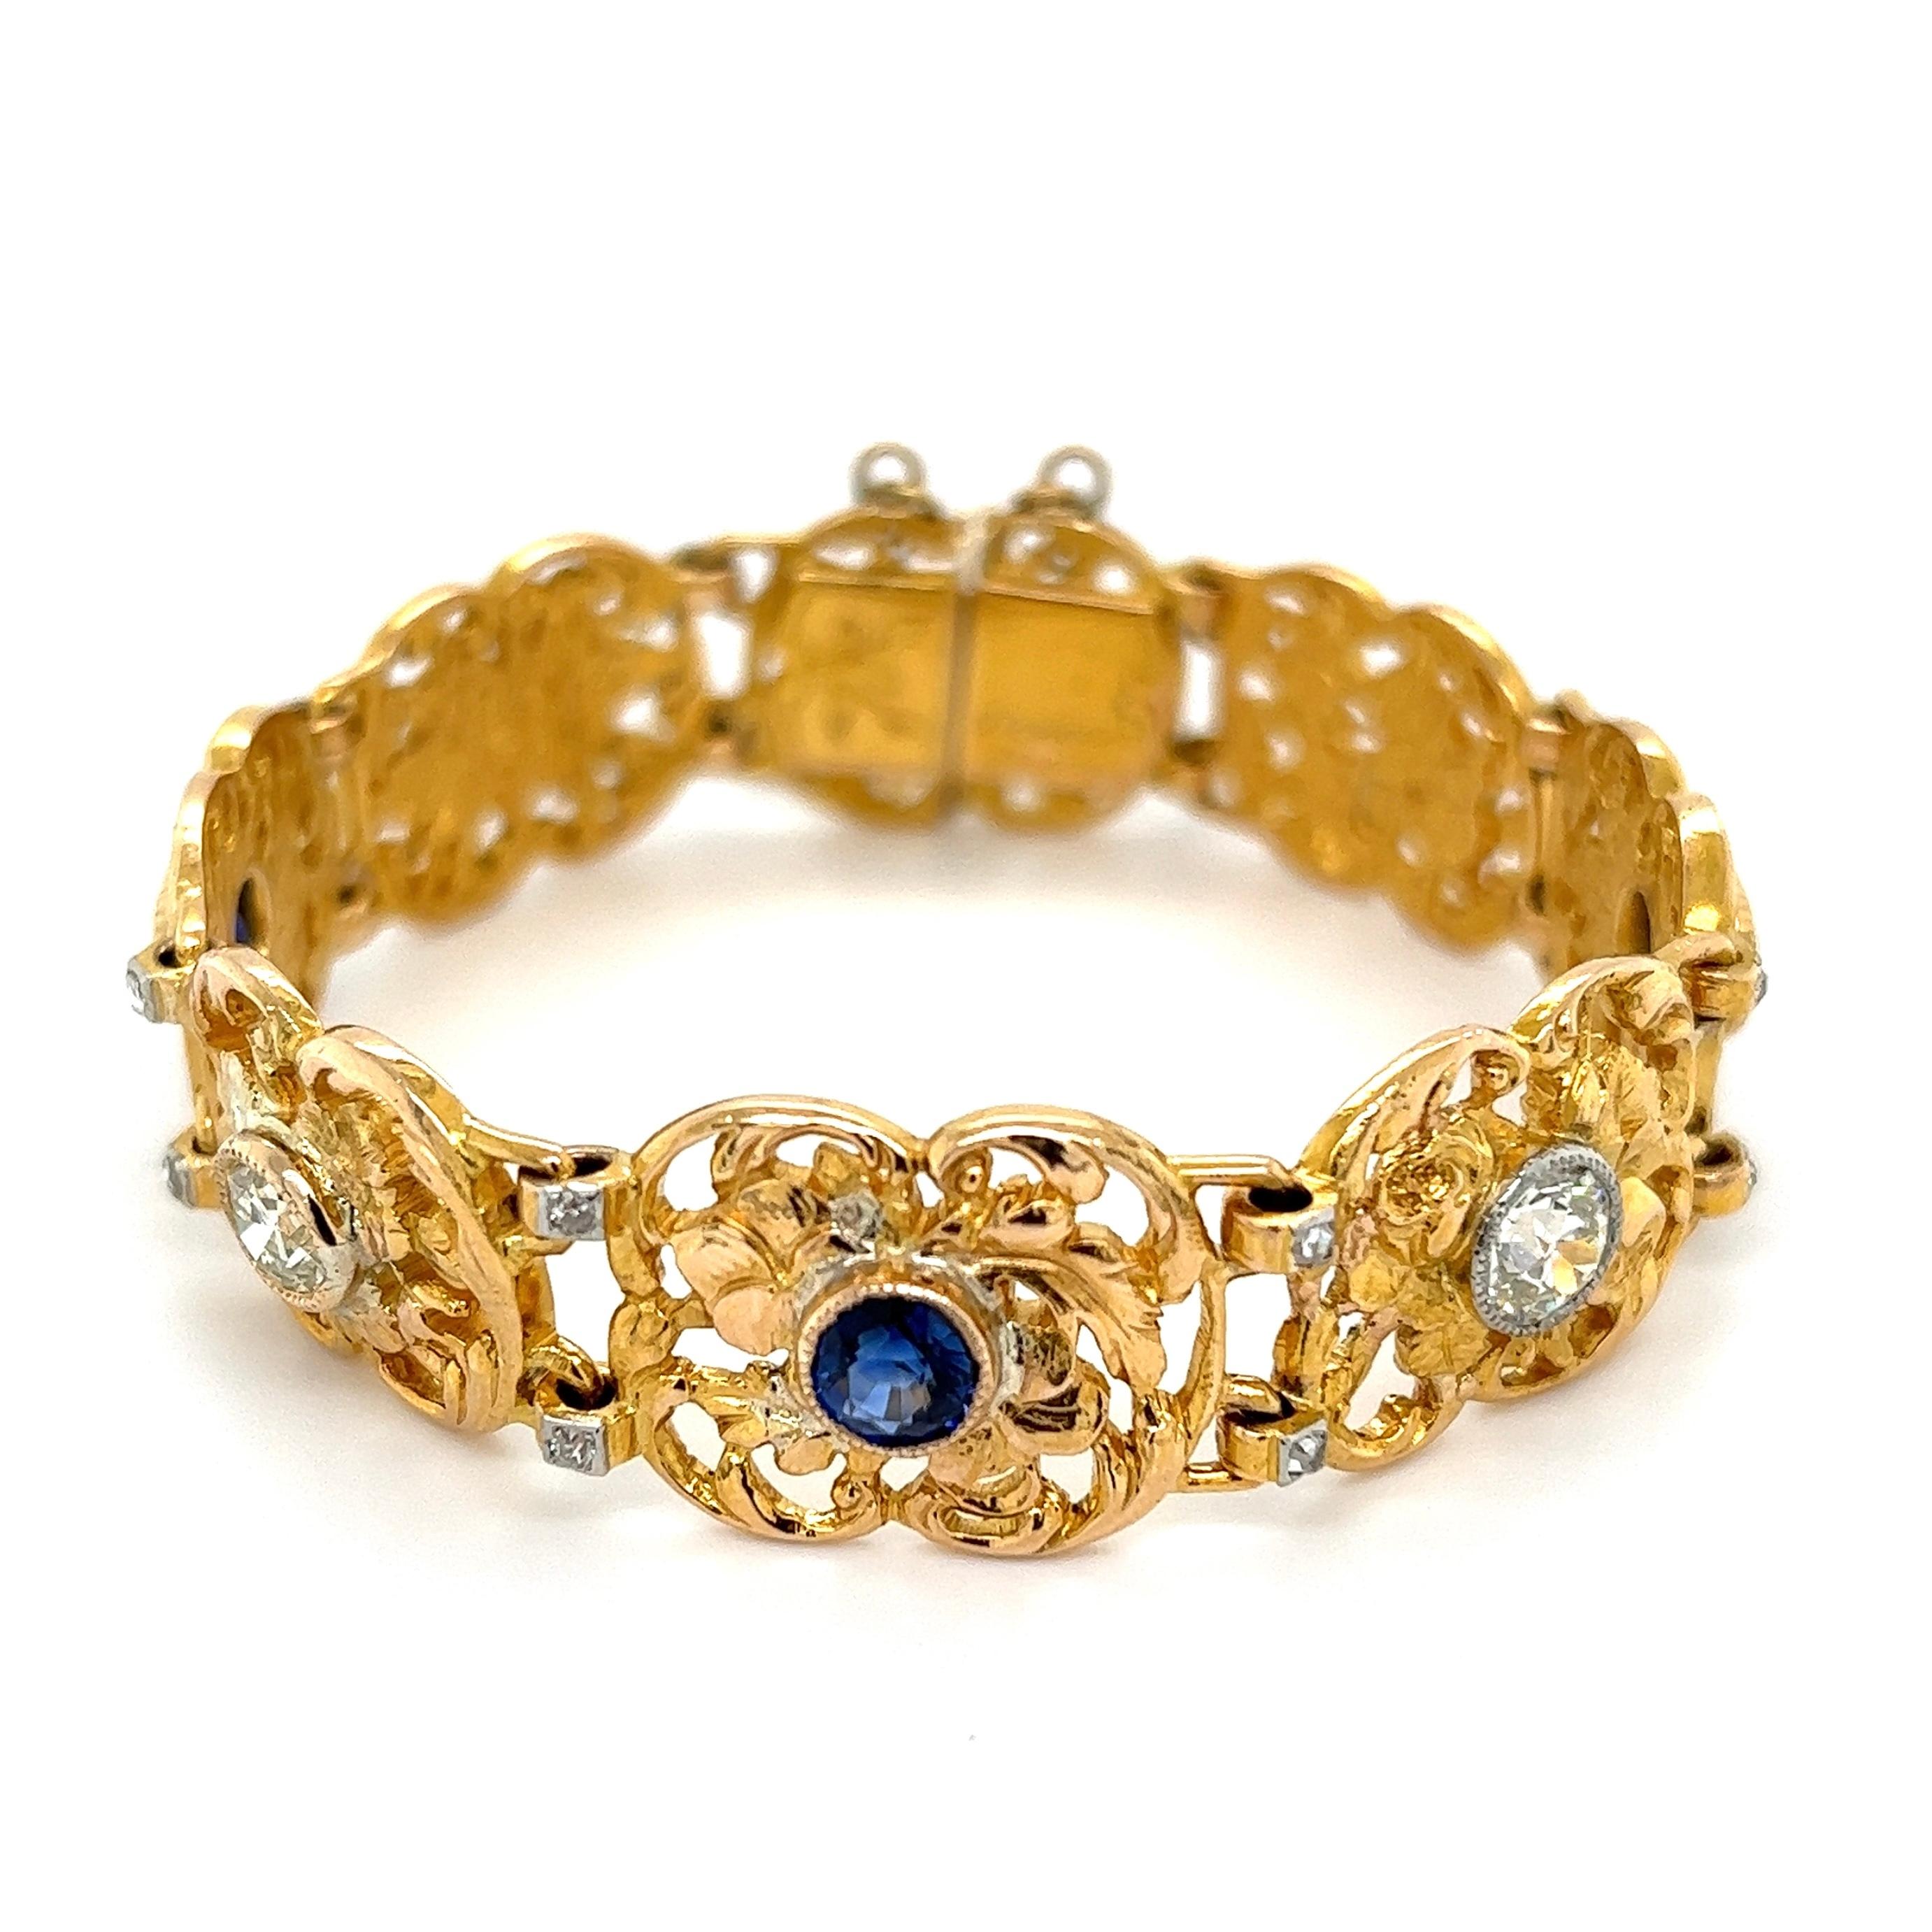 Simply Beautiful! Finely detailed Sapphire and Old European-Cut Diamond Gold Link Bracelet. Securely Hand set with Sapphires, weighing approx. 2.564tcw and OEC Diamonds, approx. 1.45tcw. Bracelet measures approx. 6.75